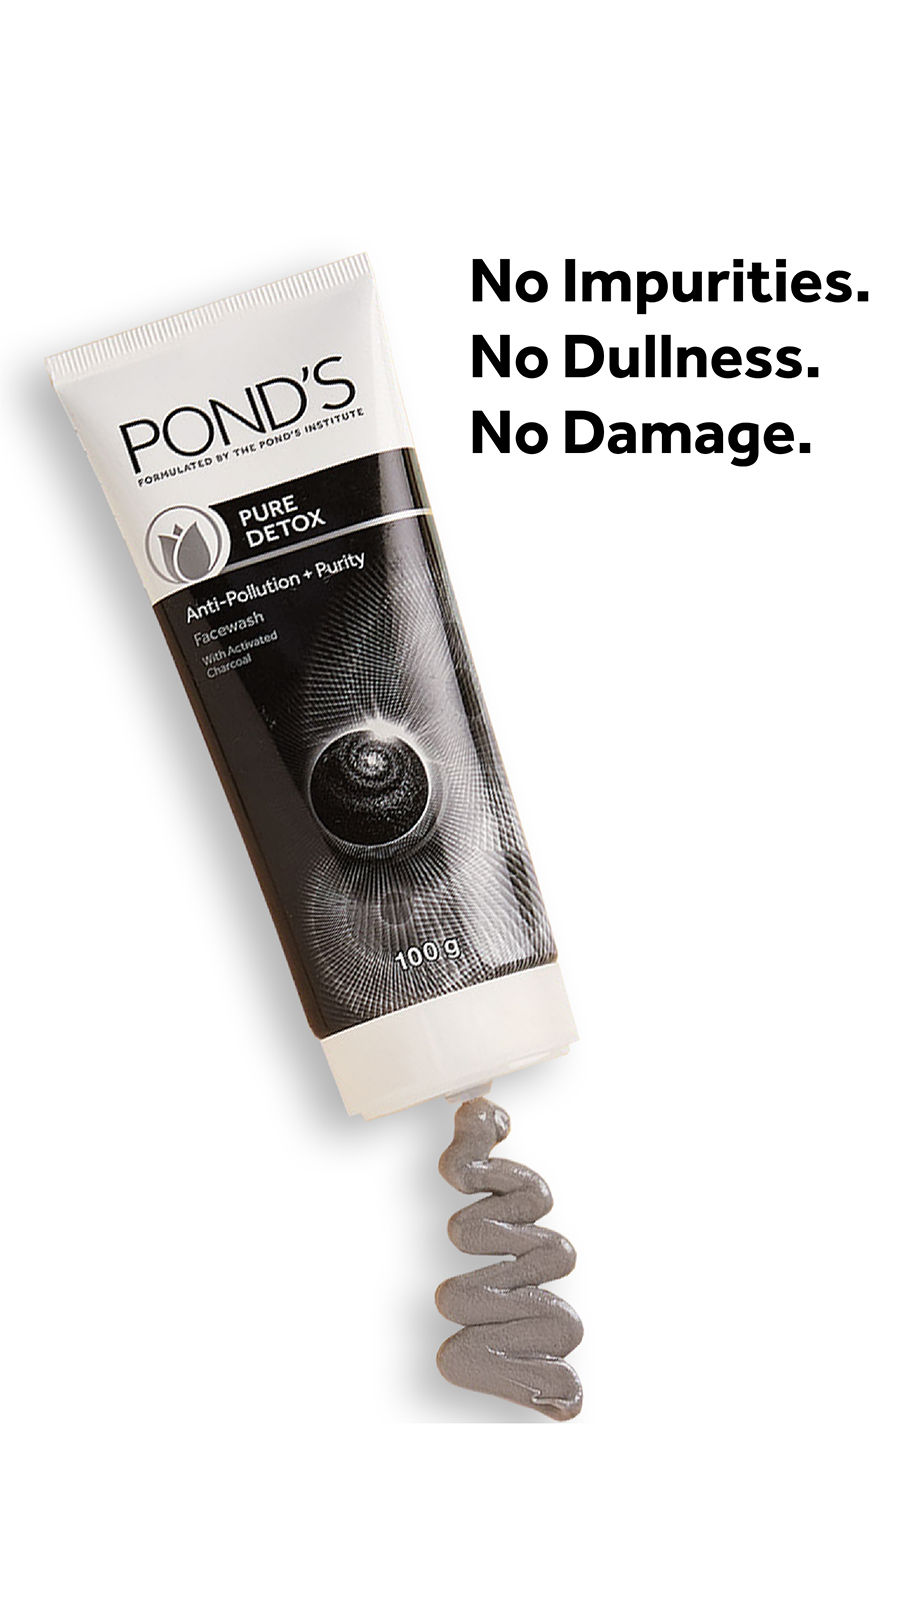 Ponds Pure Detox Face Wash, 50 gm, Pack of 1 